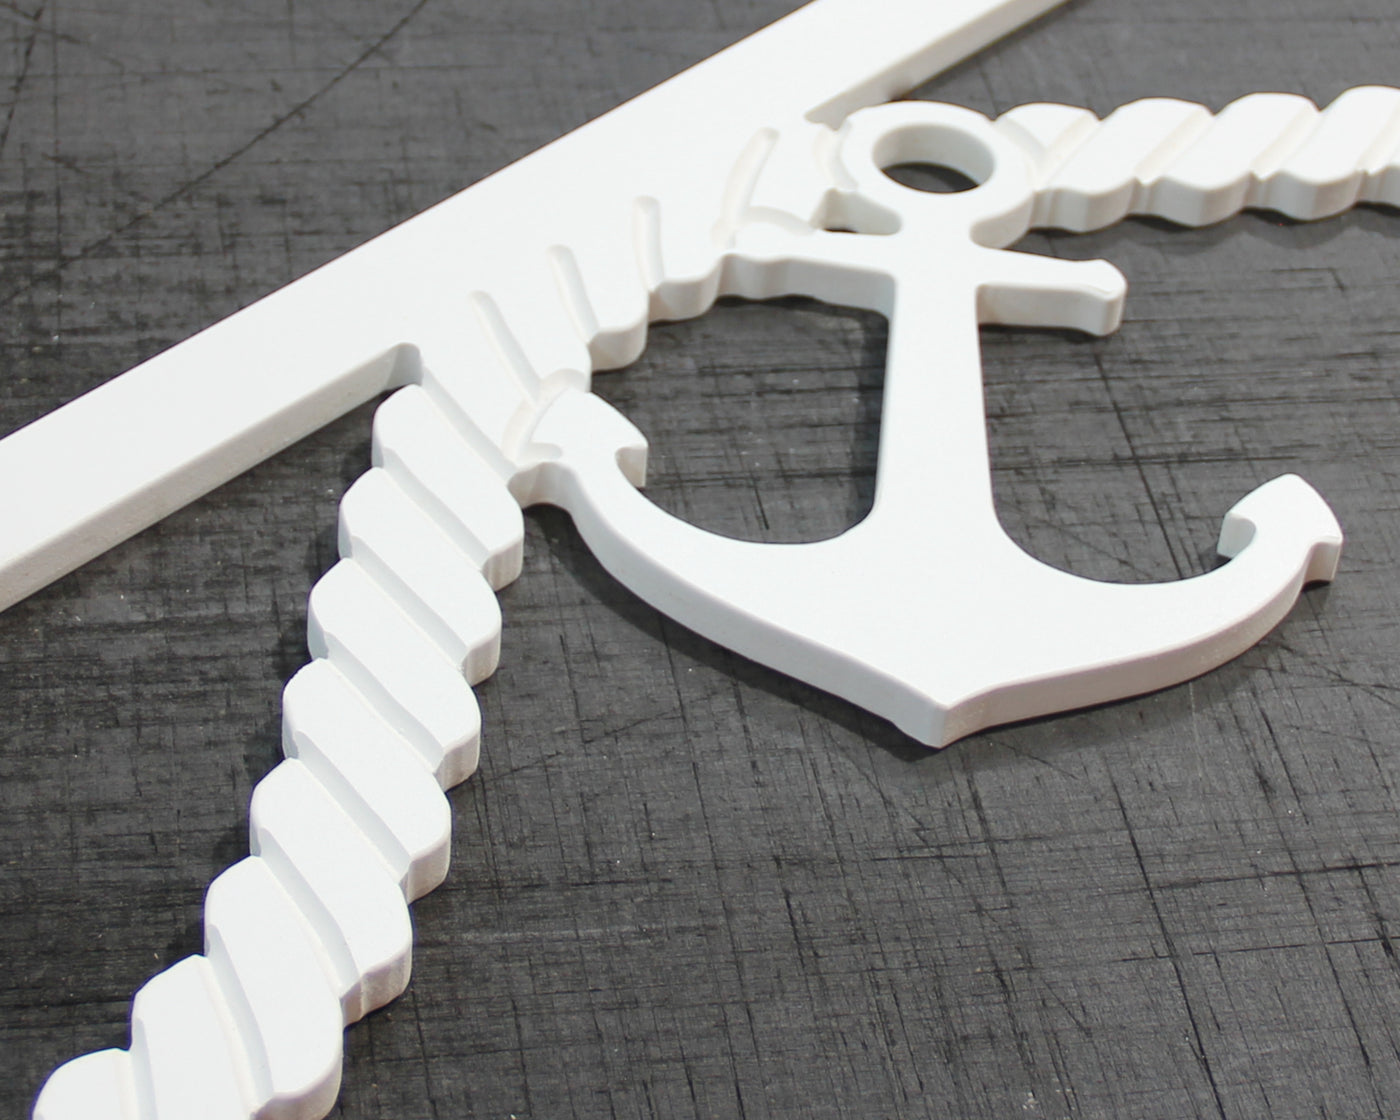 Anchor and Rope Trim 48"x8.5", Weather Resistant Plastic - exteriorplastics - Mailbox Accessories - plastic fencing - coastal decoration - nautical decorations - beach house decorations - Florida landscaping - coastal landscaping - nautical landscaping - nautical fences - nautical gates - home improvement - home decor - fencing and barriers